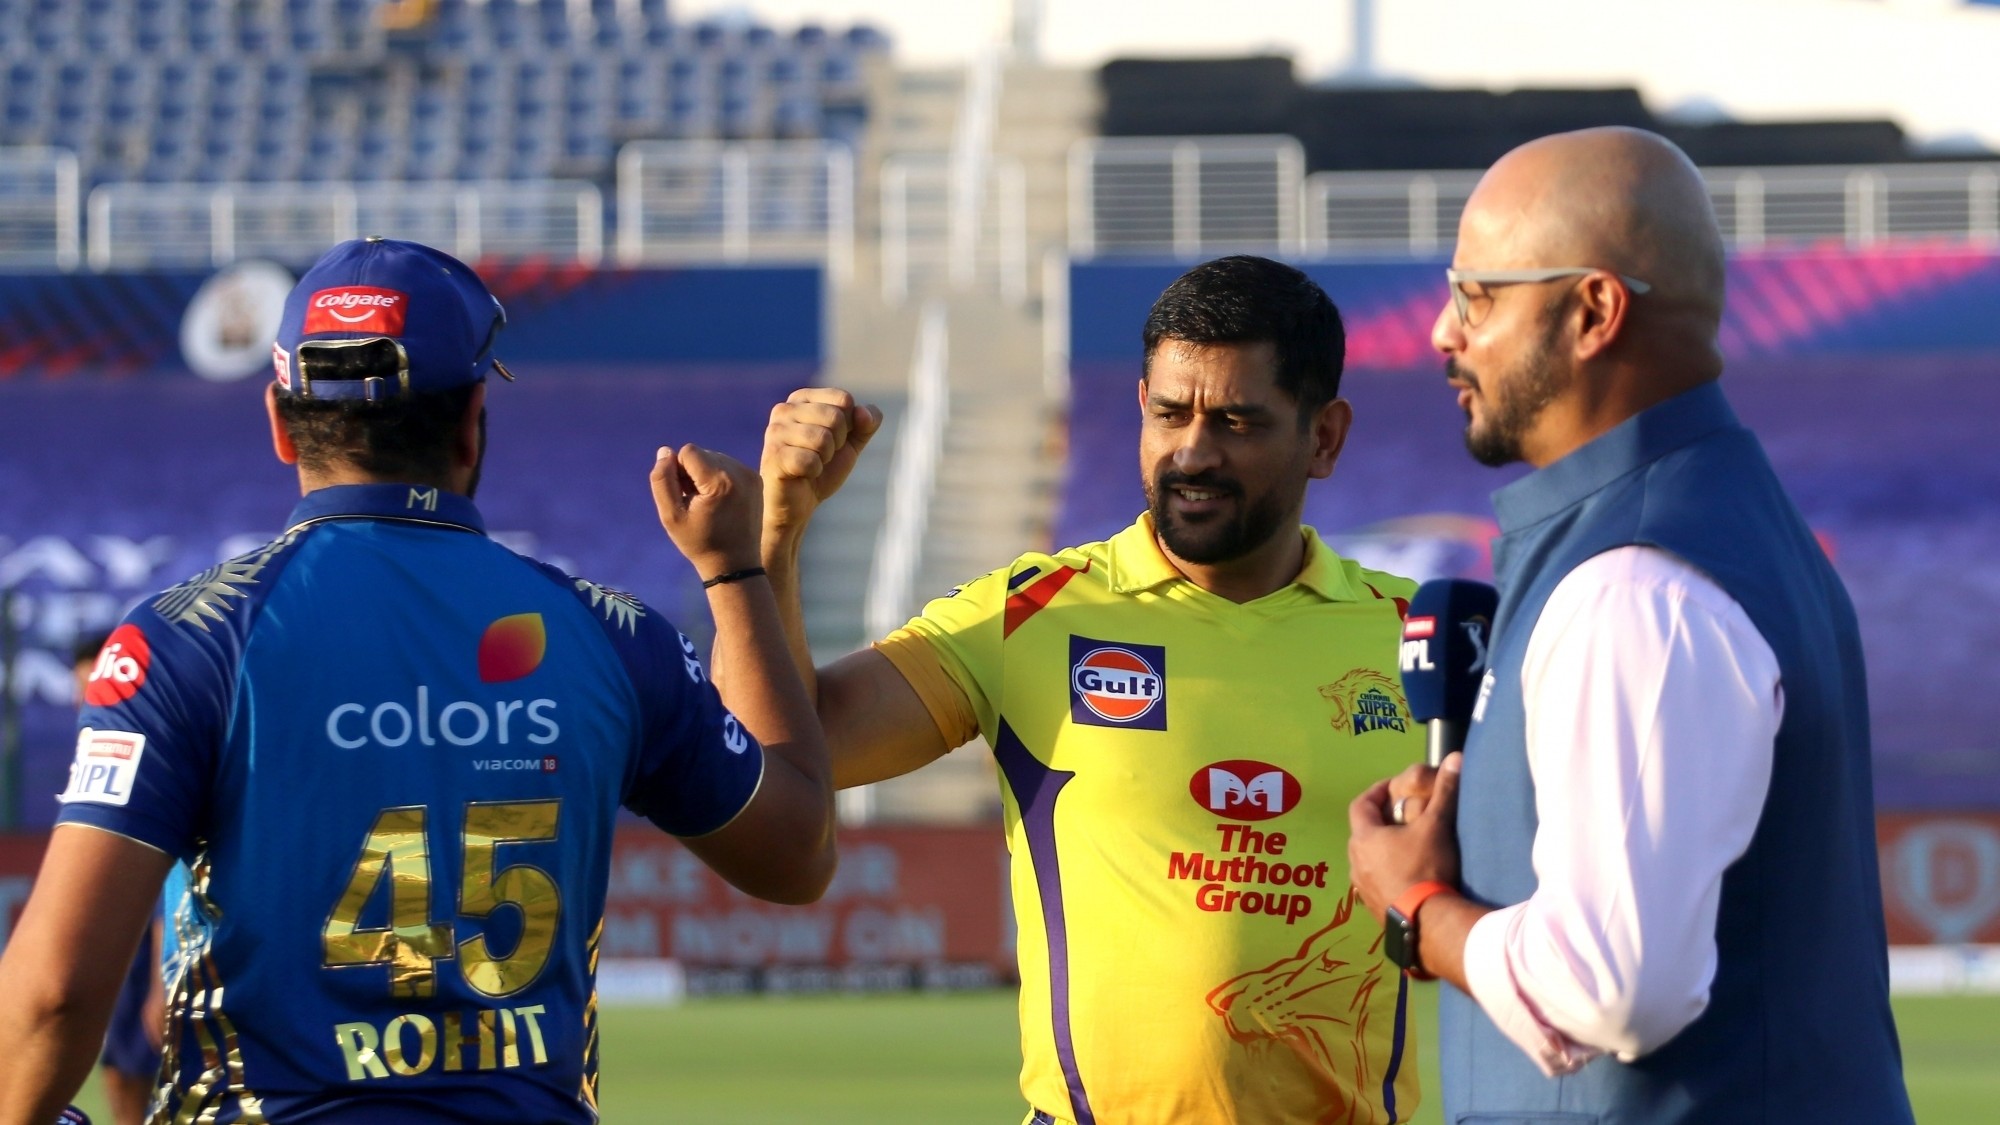 IPL 2020: BCCI reveals that a record 200 million people watched MI v CSK IPL 2020 opener